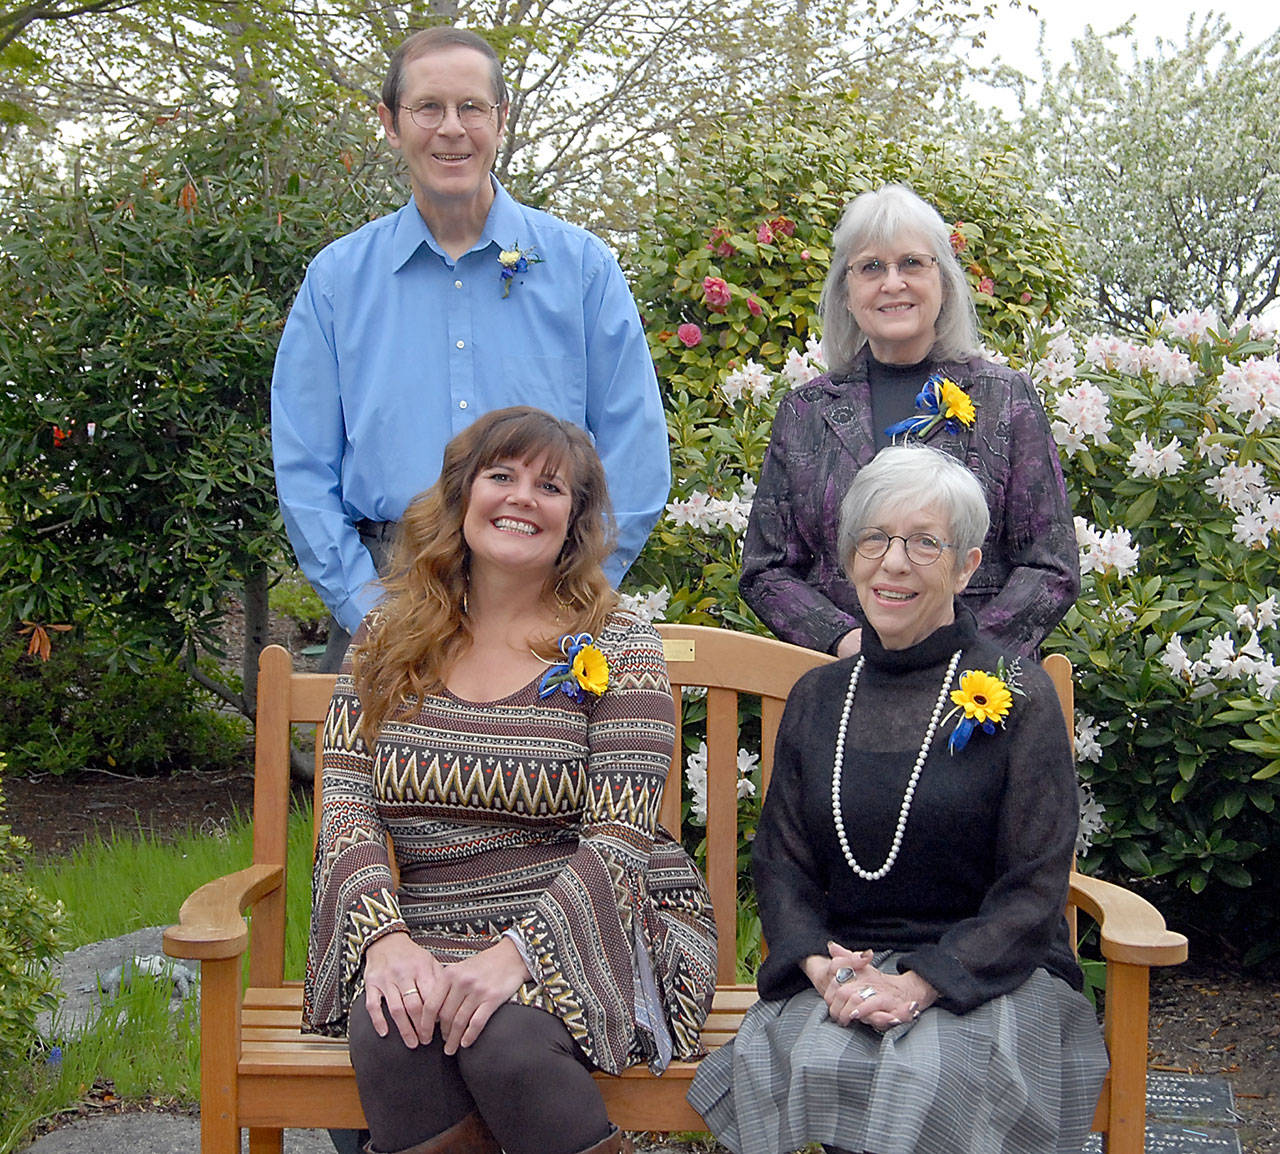 The winners of the 2019 Clallam County Community Service Awards gather at Holy Trinity Lutheran Church in Port Angeles. The winners are, front row from left, Leslie Kidwell Robertson and Edna Petersen, and back row from left, Tim Crowley and Judy Hendrickson. (Keith Thorpe/Peninsula Daily News)